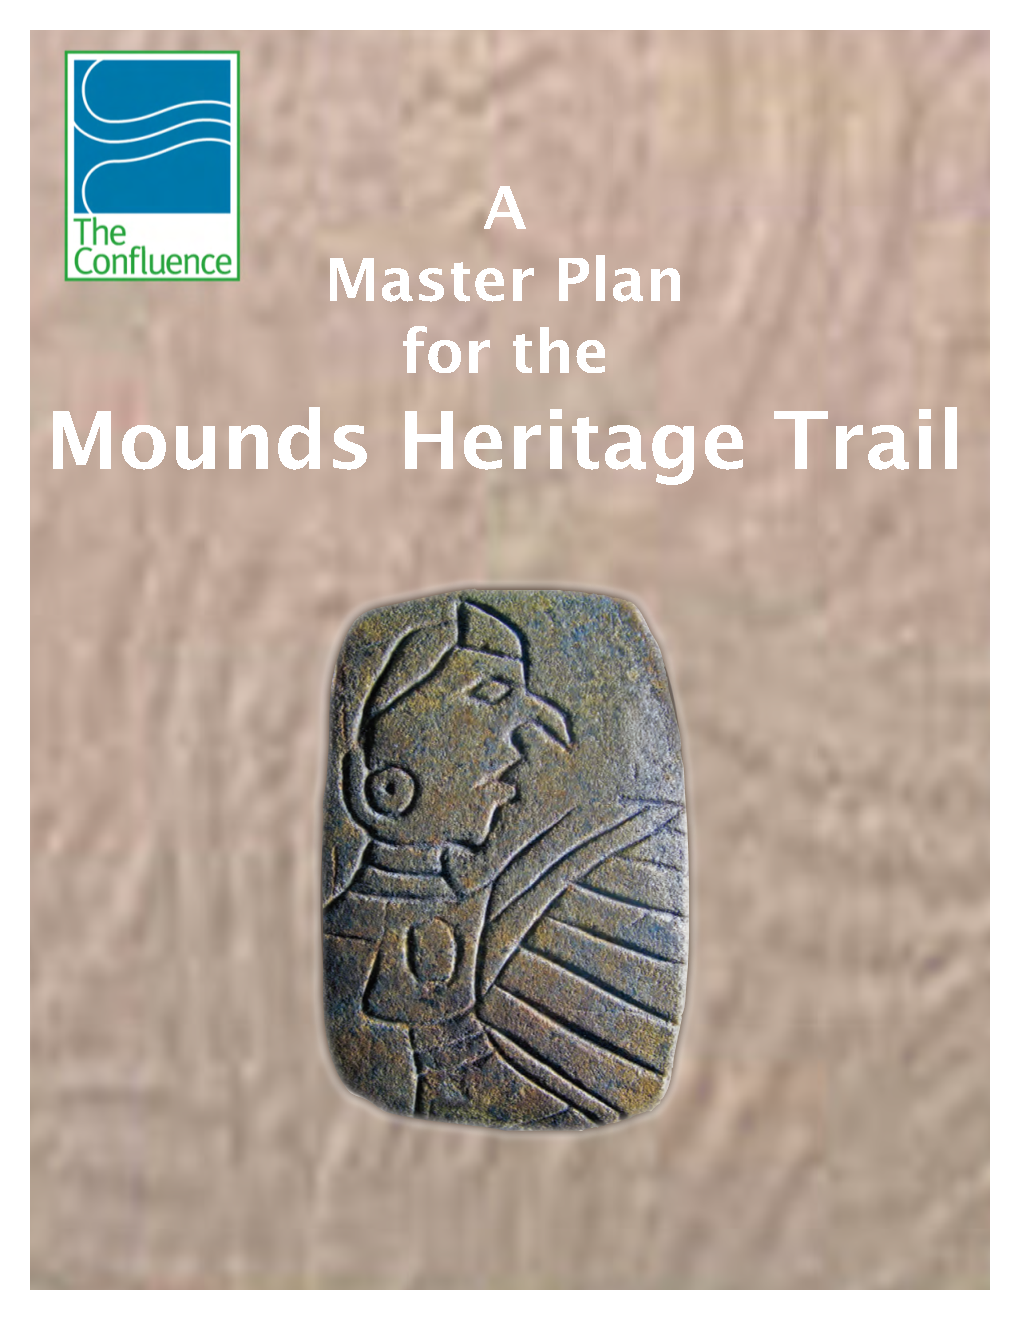 Mounds Heritage Trail Master Plan for Both Missouri and Illinois